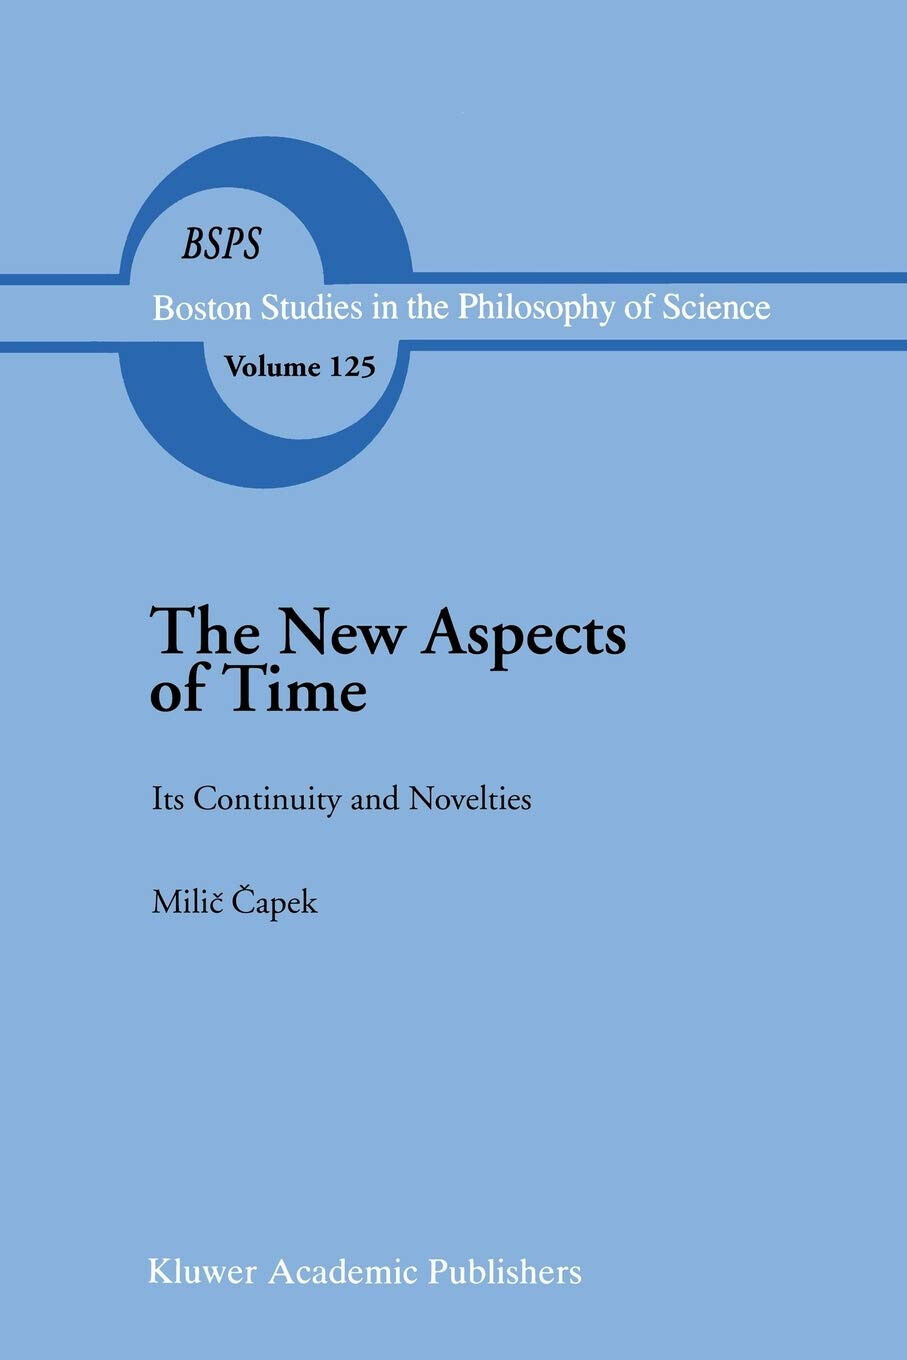 The New Aspects of Time - M. Capek - Springer, 2013